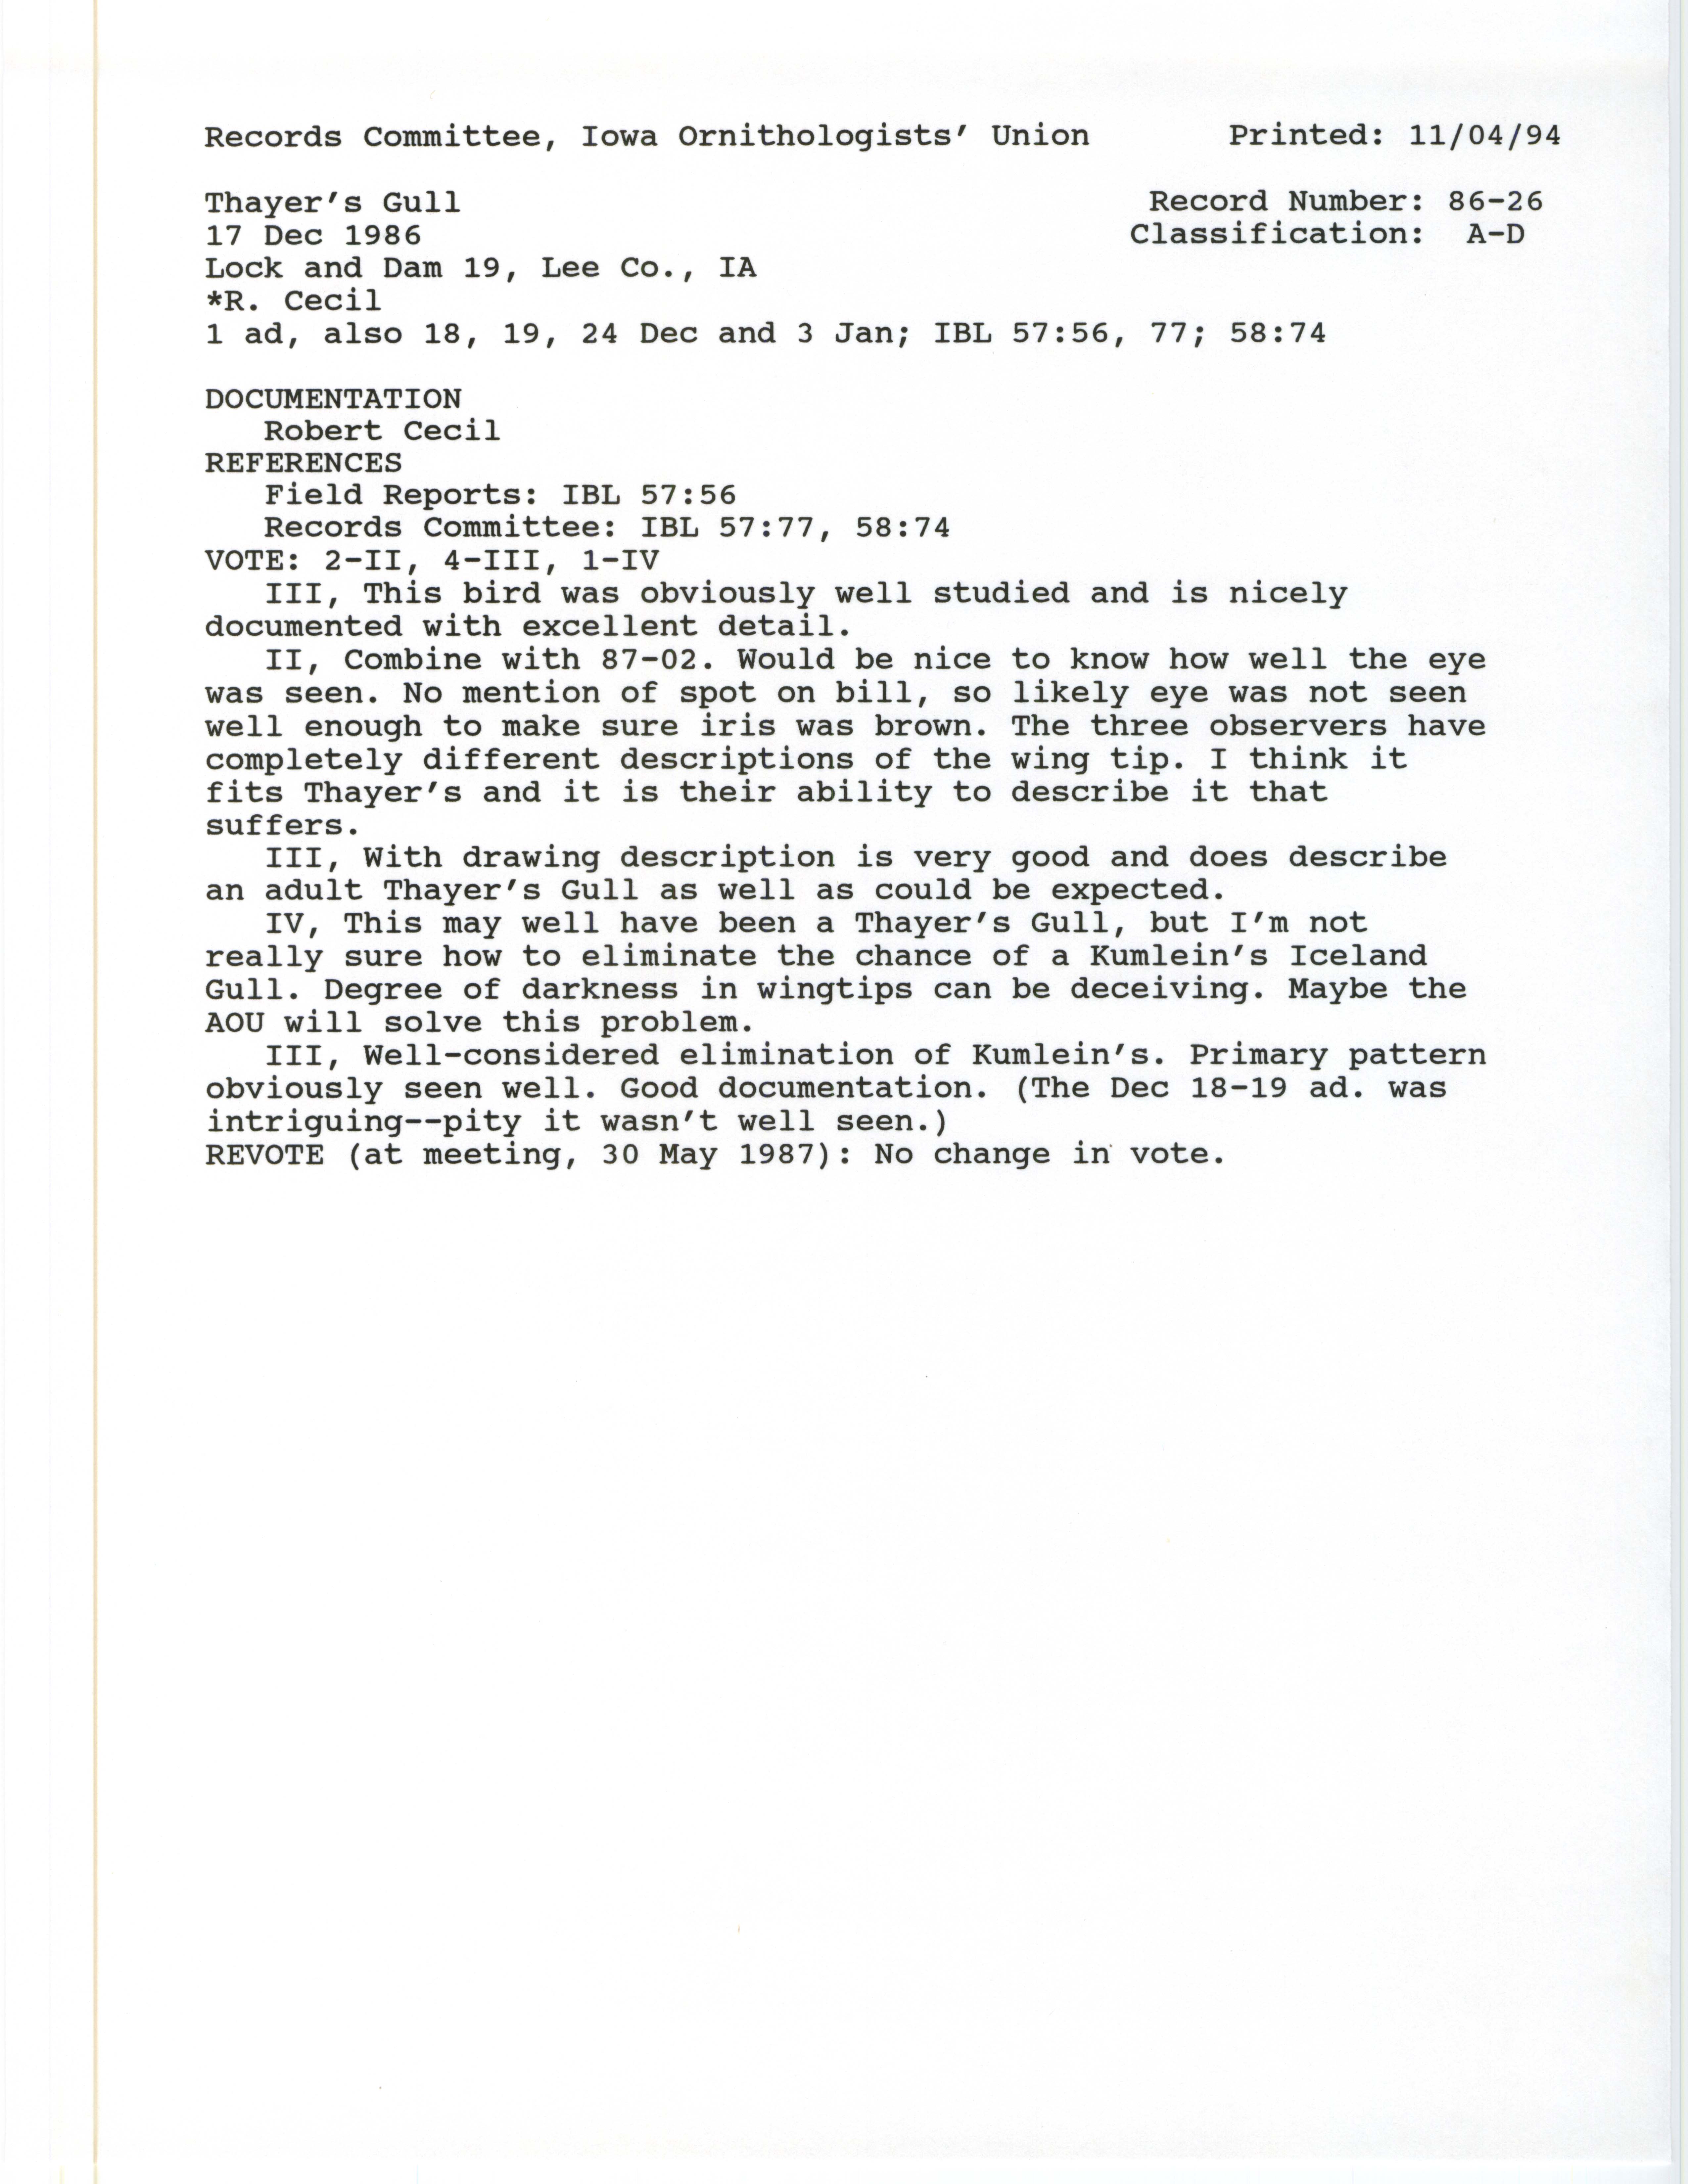 Records Committee review for rare bird sighting of Thayer's Gull at Lock and Dam 19, 1986